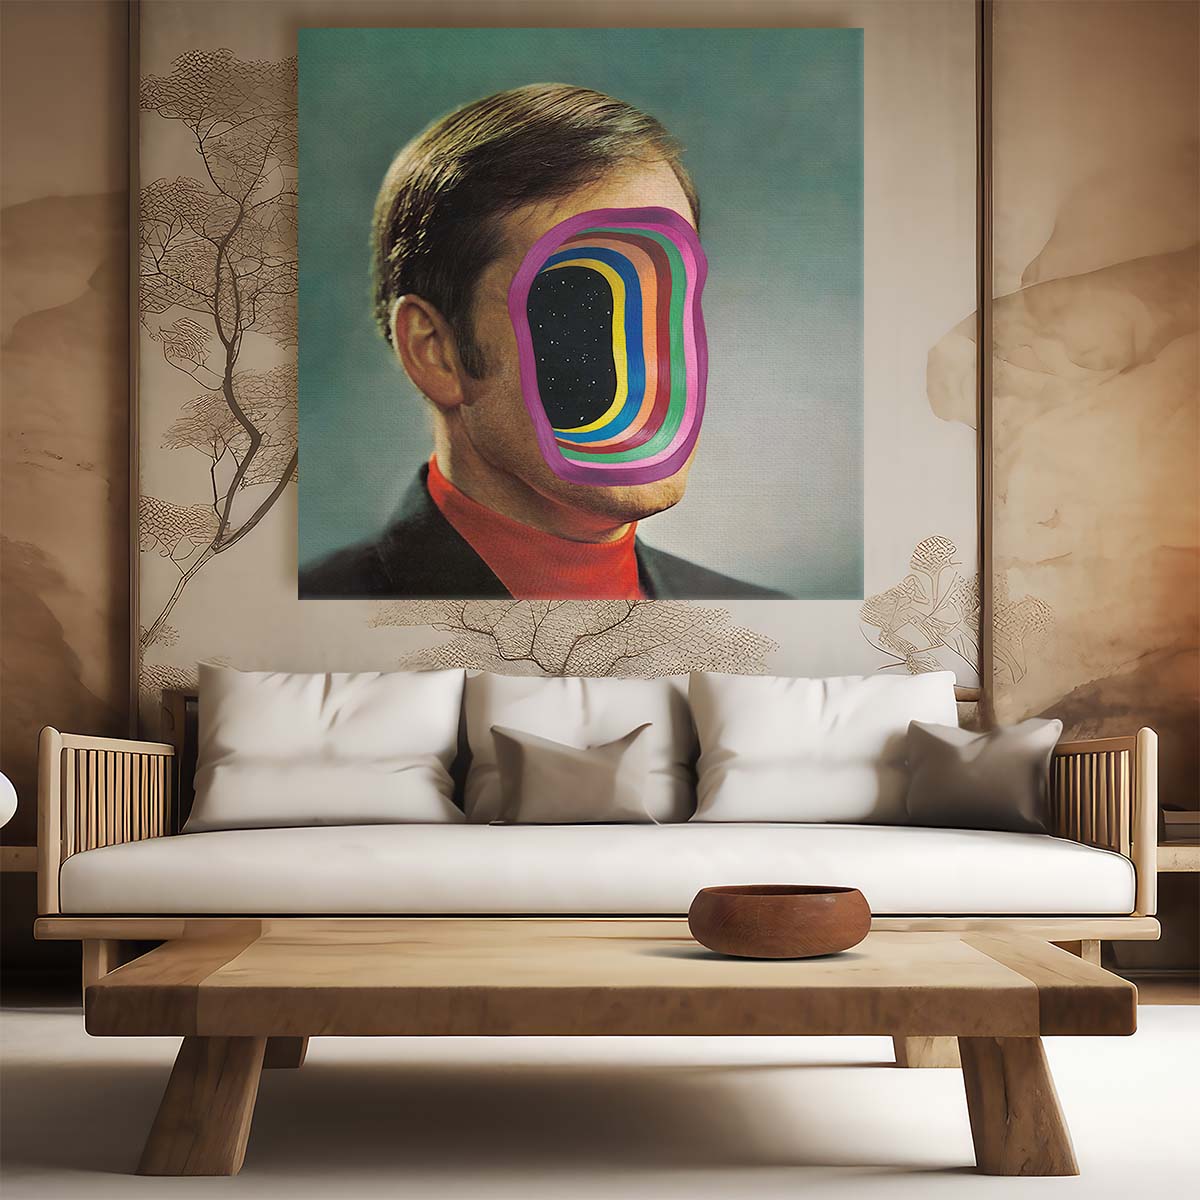 Retro Optical Illusion Illustration of a Colorful Universe Man Wall Art by Luxuriance Designs. Made in USA.